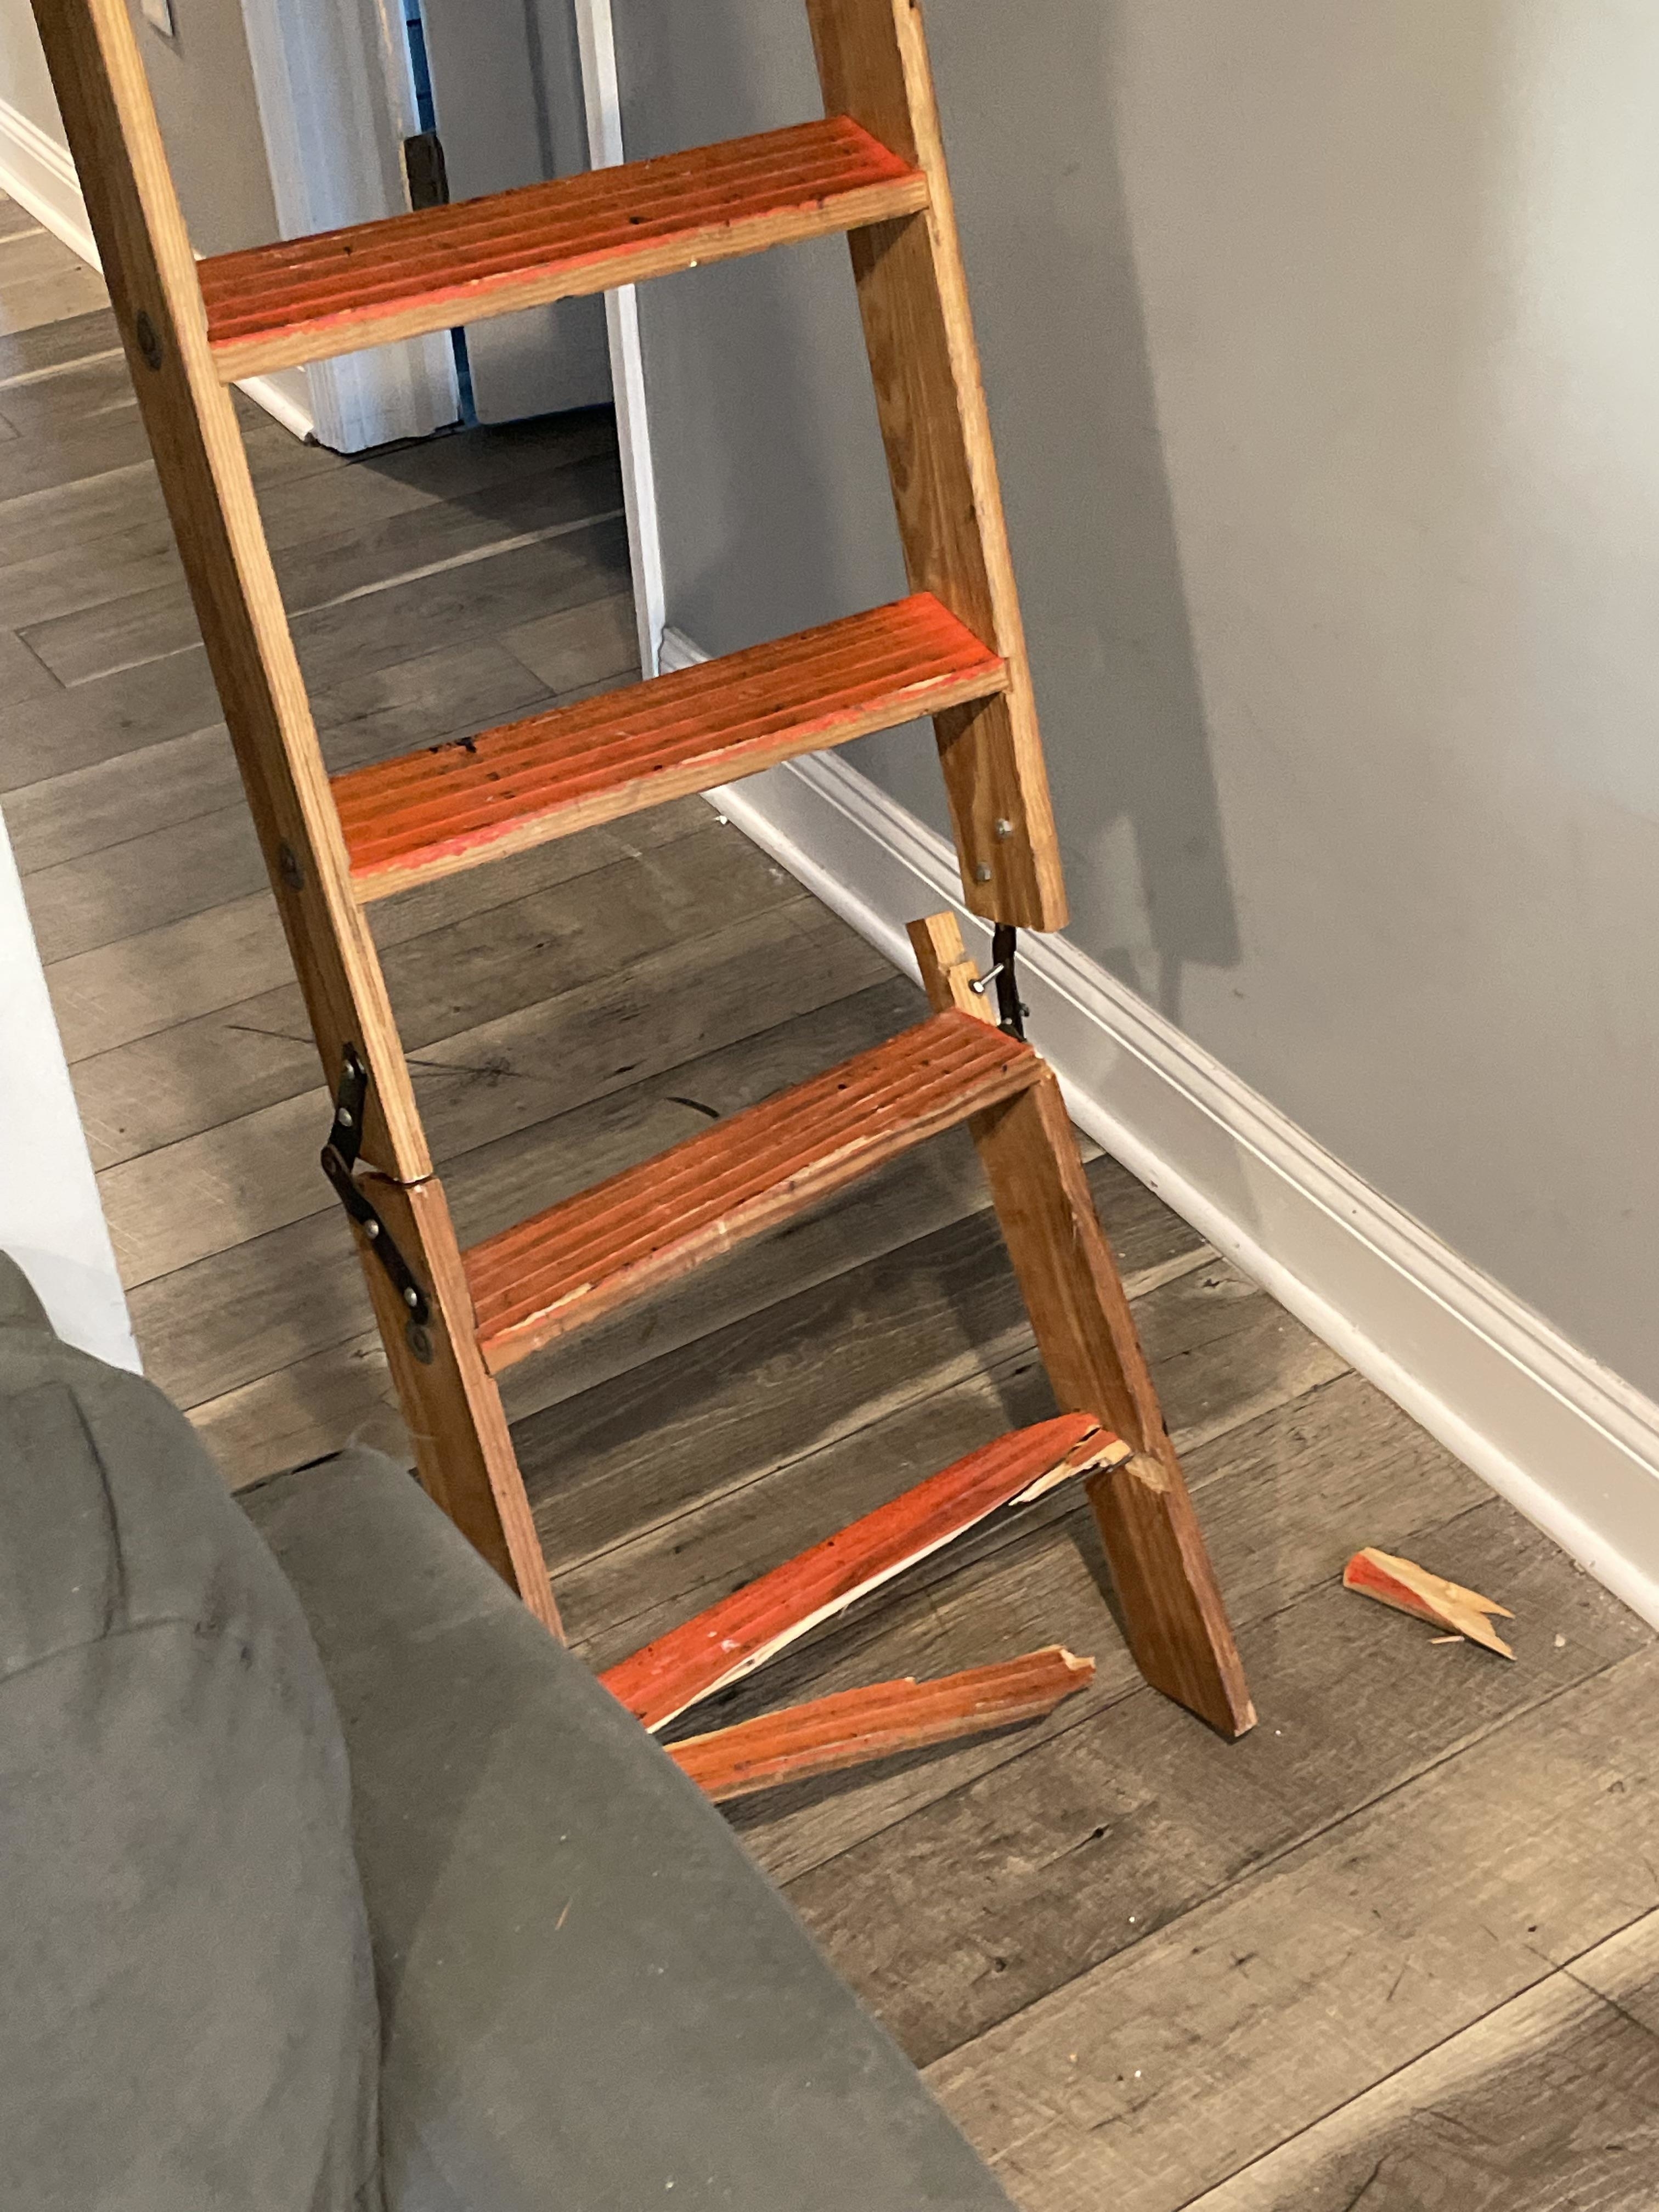 Wooden step ladder with a broken step, pieces on the floor